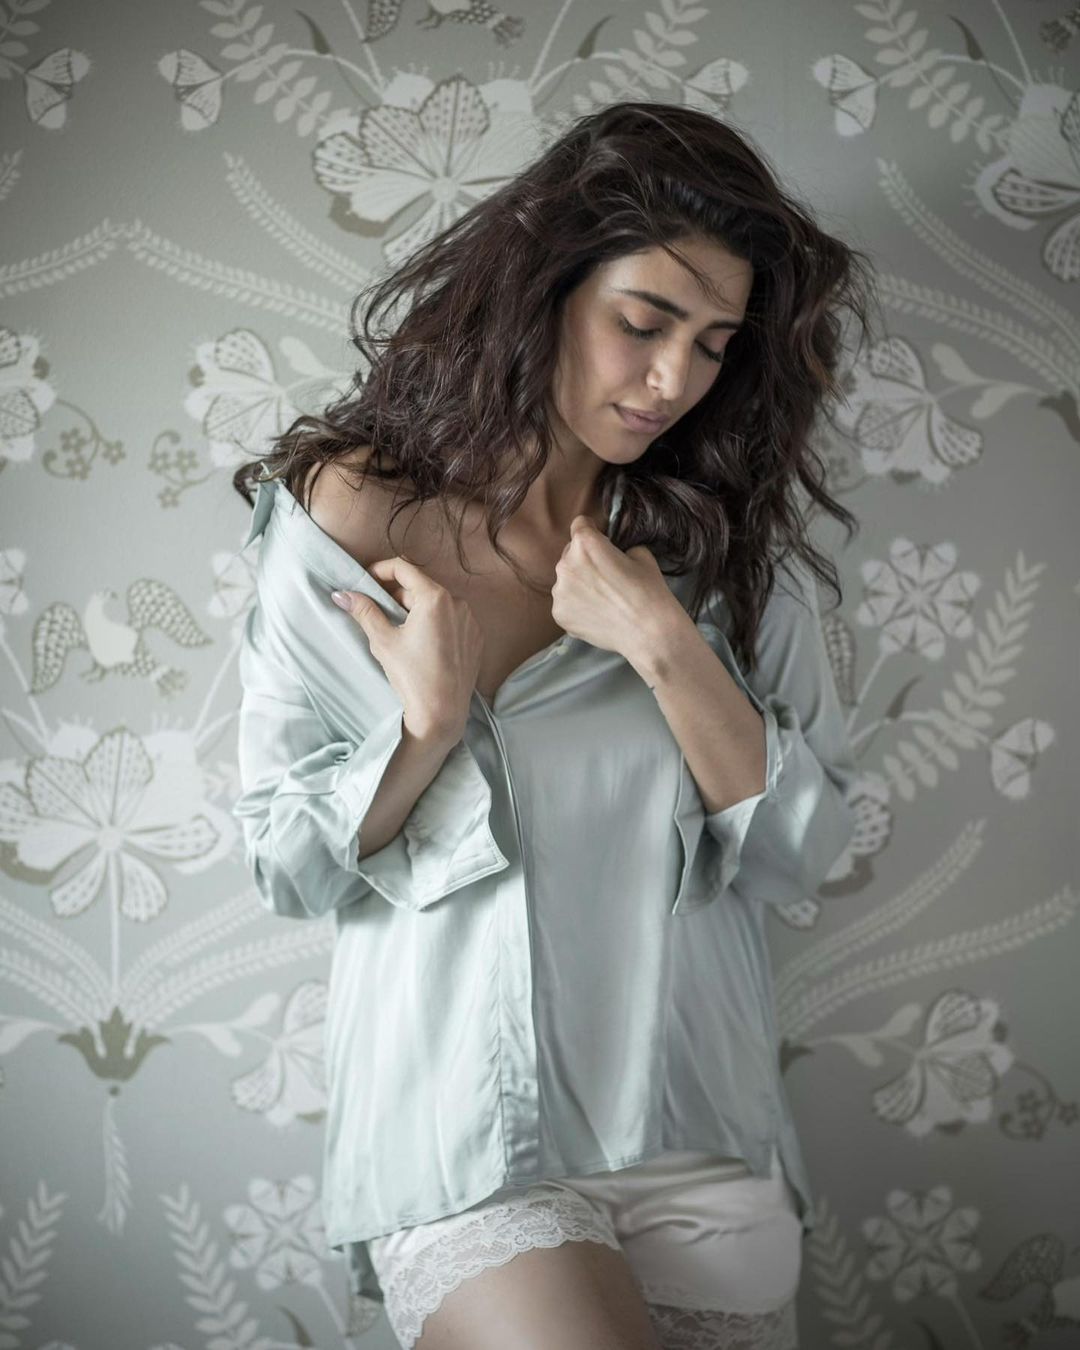  Karishma Tanna is upping the glam quotient in her latest photoshoot. (Image: Instagram)